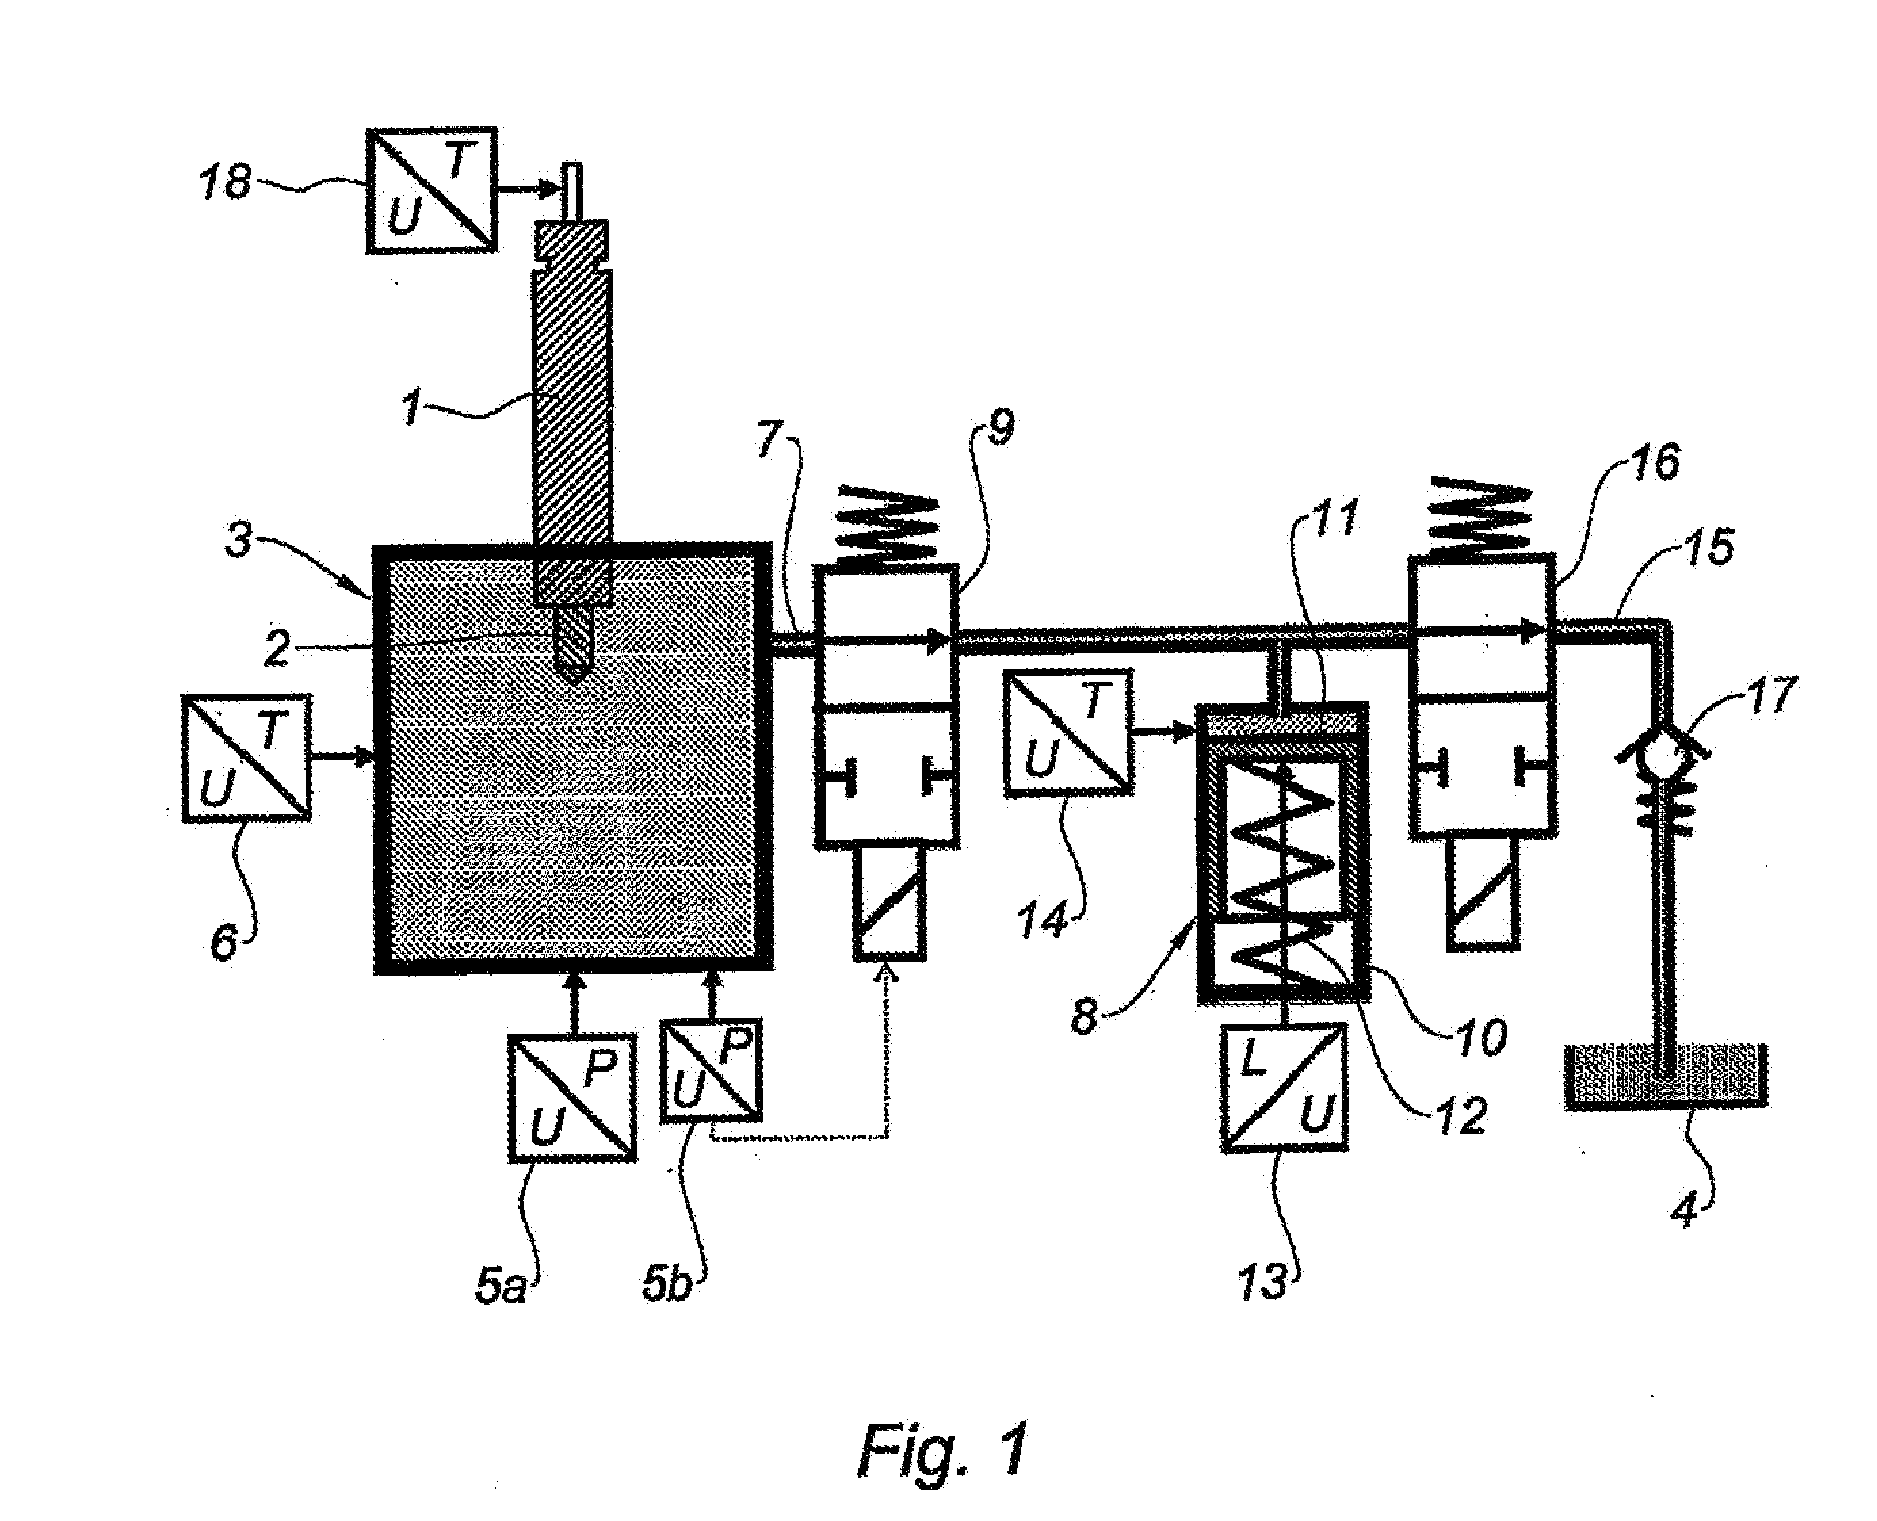 Method for analyzing the step-by-step injection rate provided by a fuel injection system used in a high power heat engine